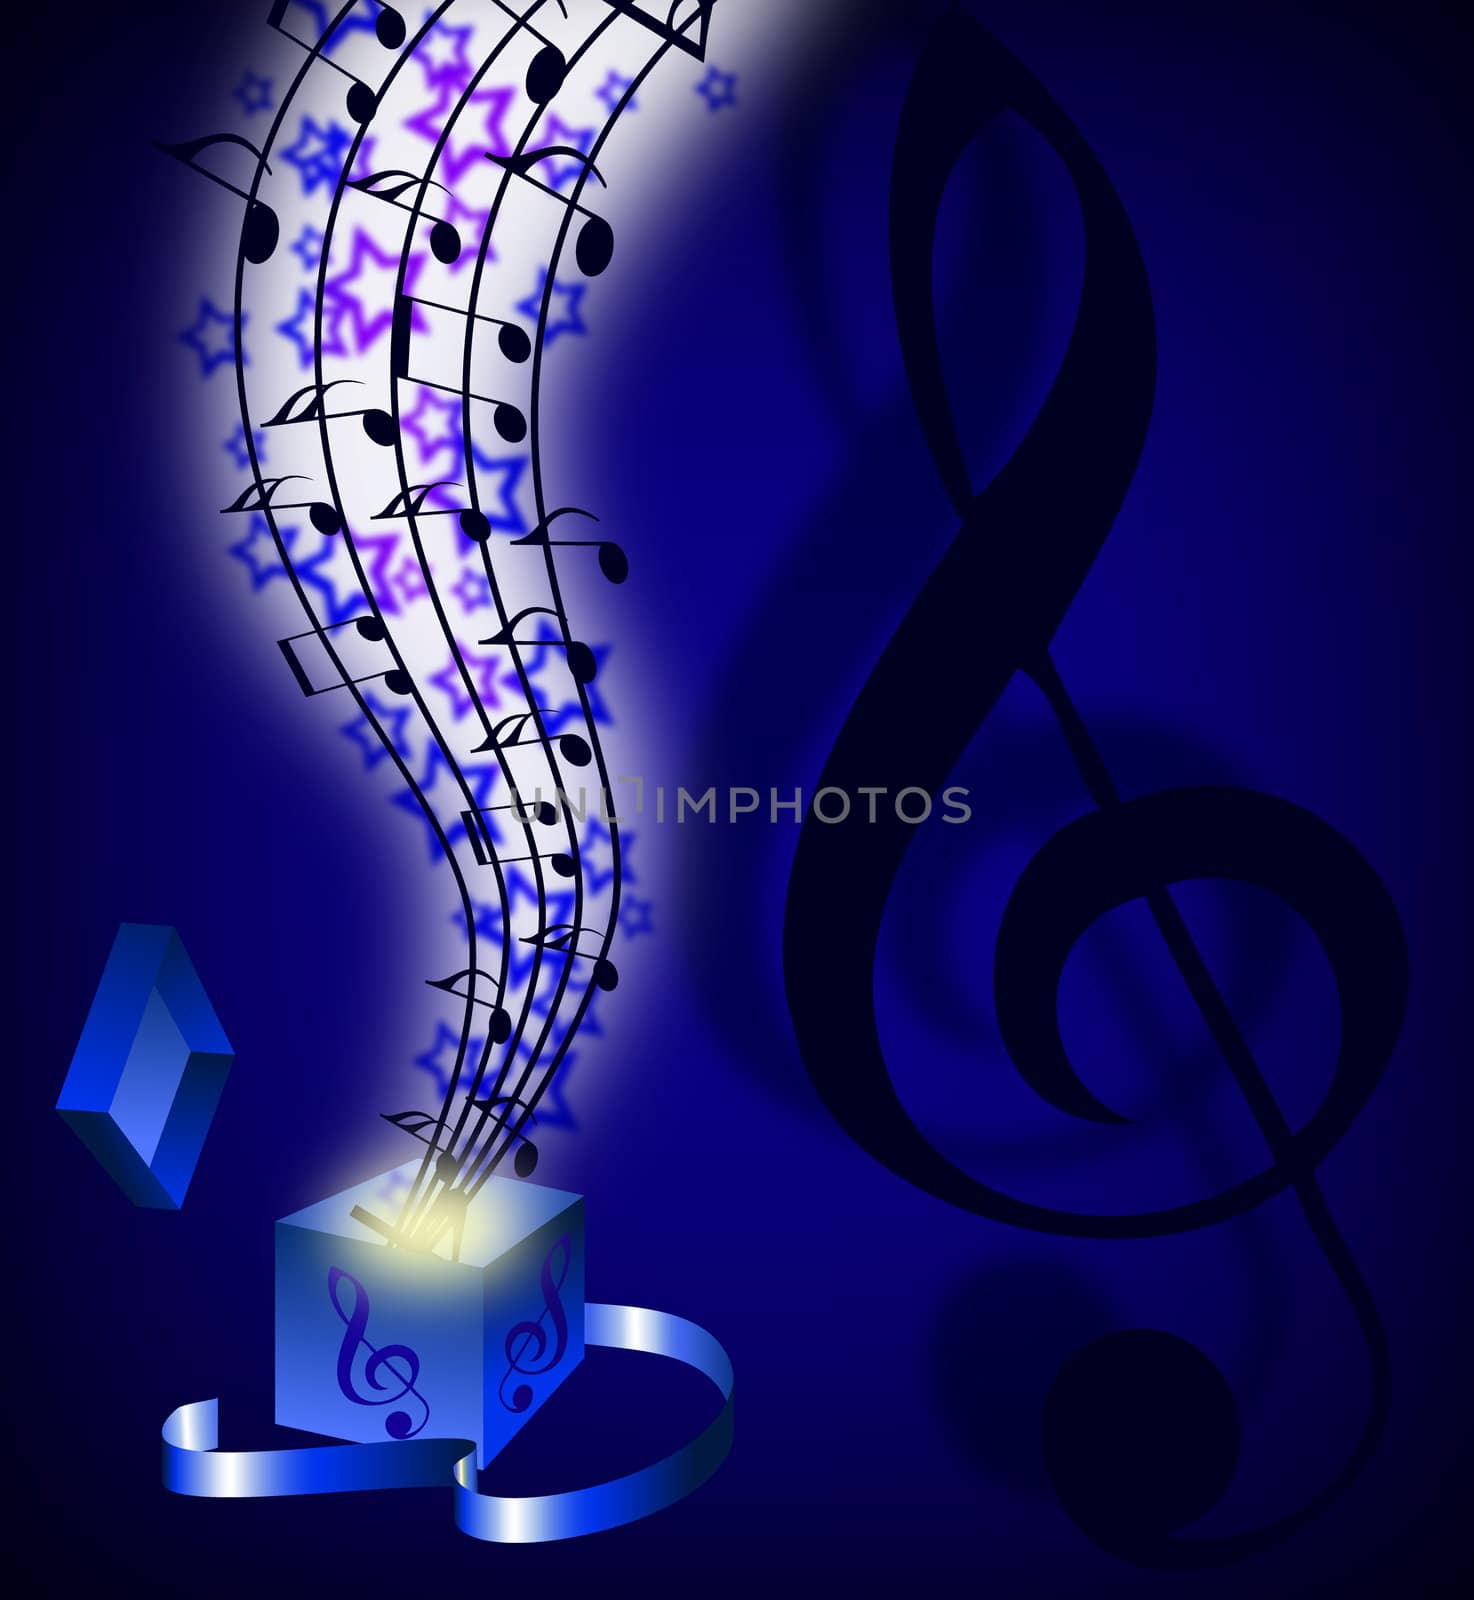 abstract music background with musical notes, by svtrotof